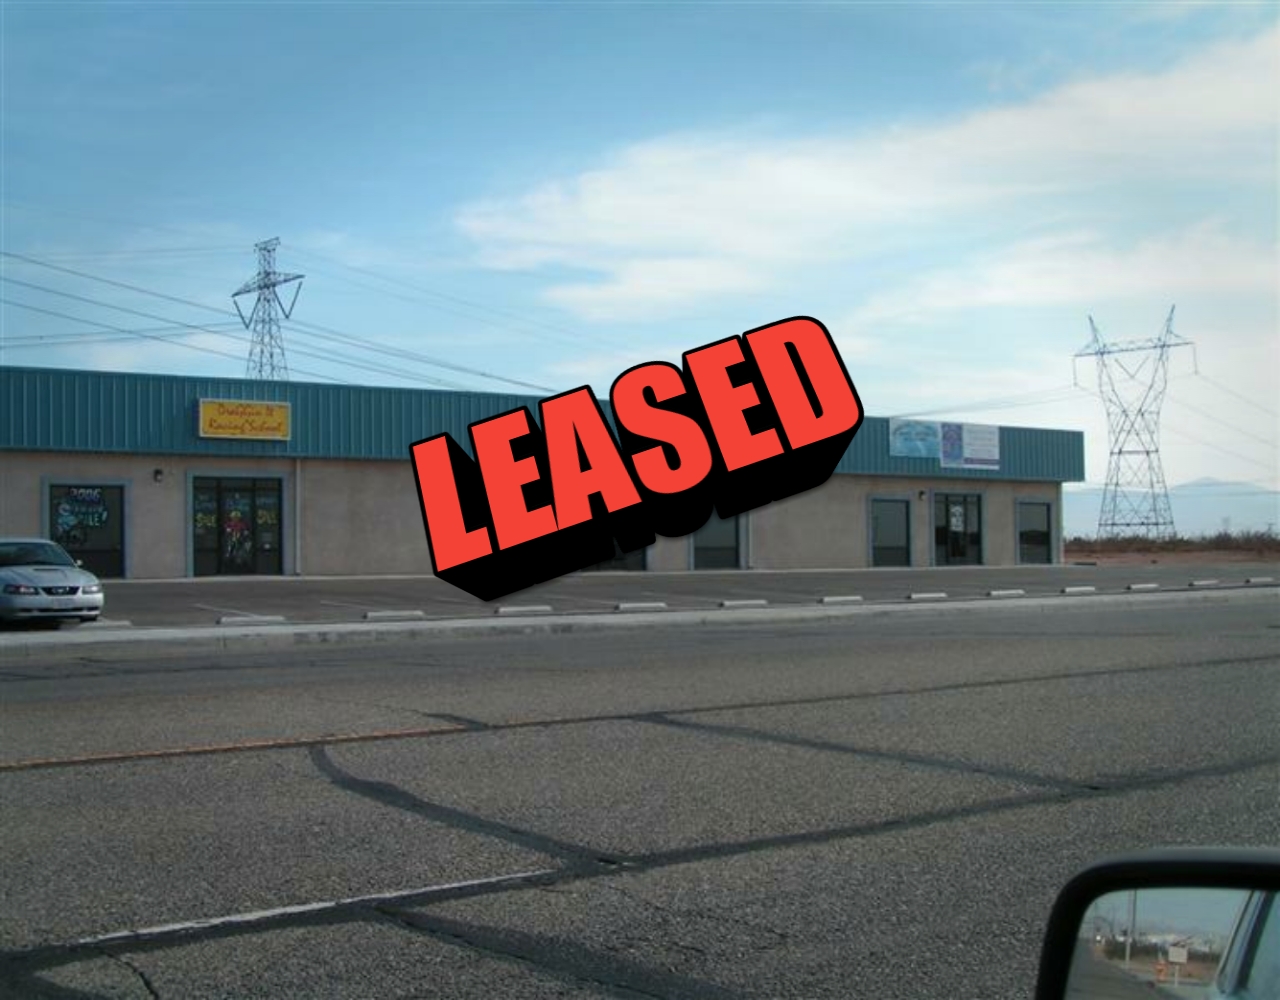 Just Leased 11619 Rancho Rd, Ste 1 Adelanto, CA